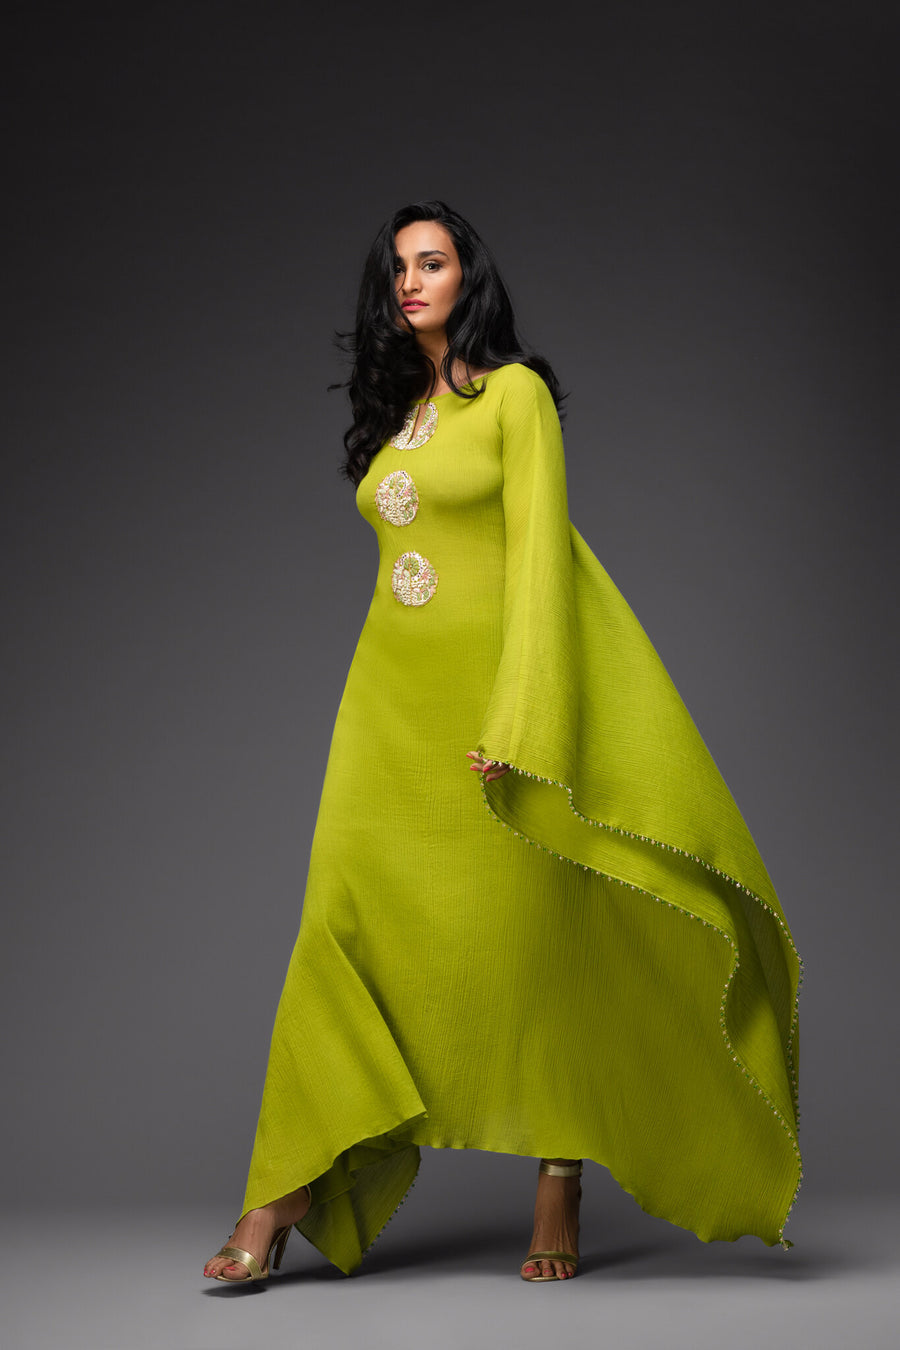 Light Chartreuse embroidererd kaftan with matching pants